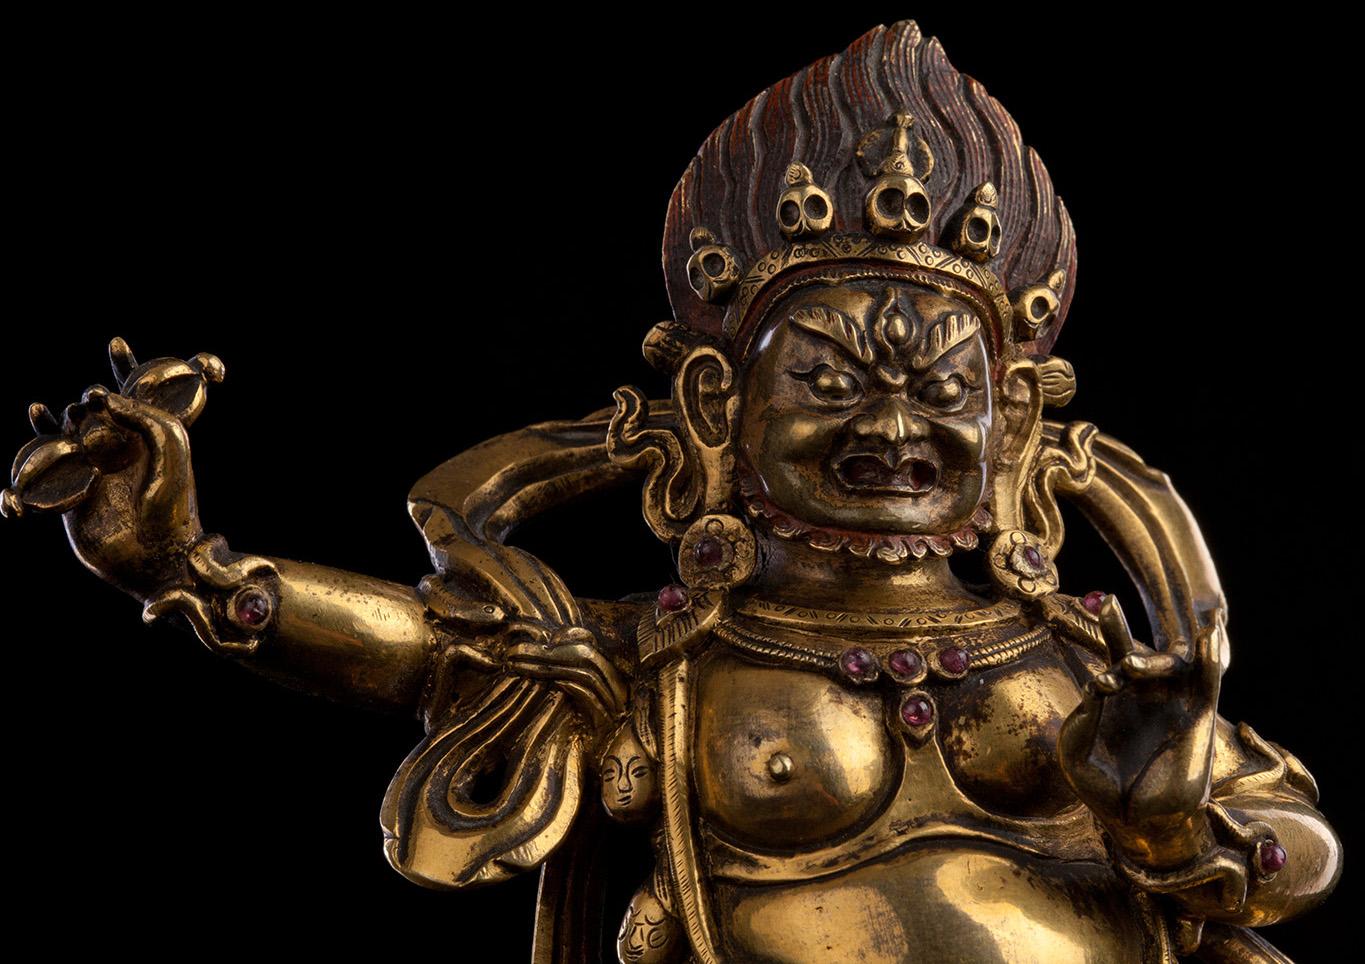 18thC Tibetan Fierce Deity. From an old high-end Swedish collection. Measures 5 inches tall. Cast and finished as well as a piece of fine jewelry, this is a world-class piece that almost glows in the dark or the light. With original jewels, the